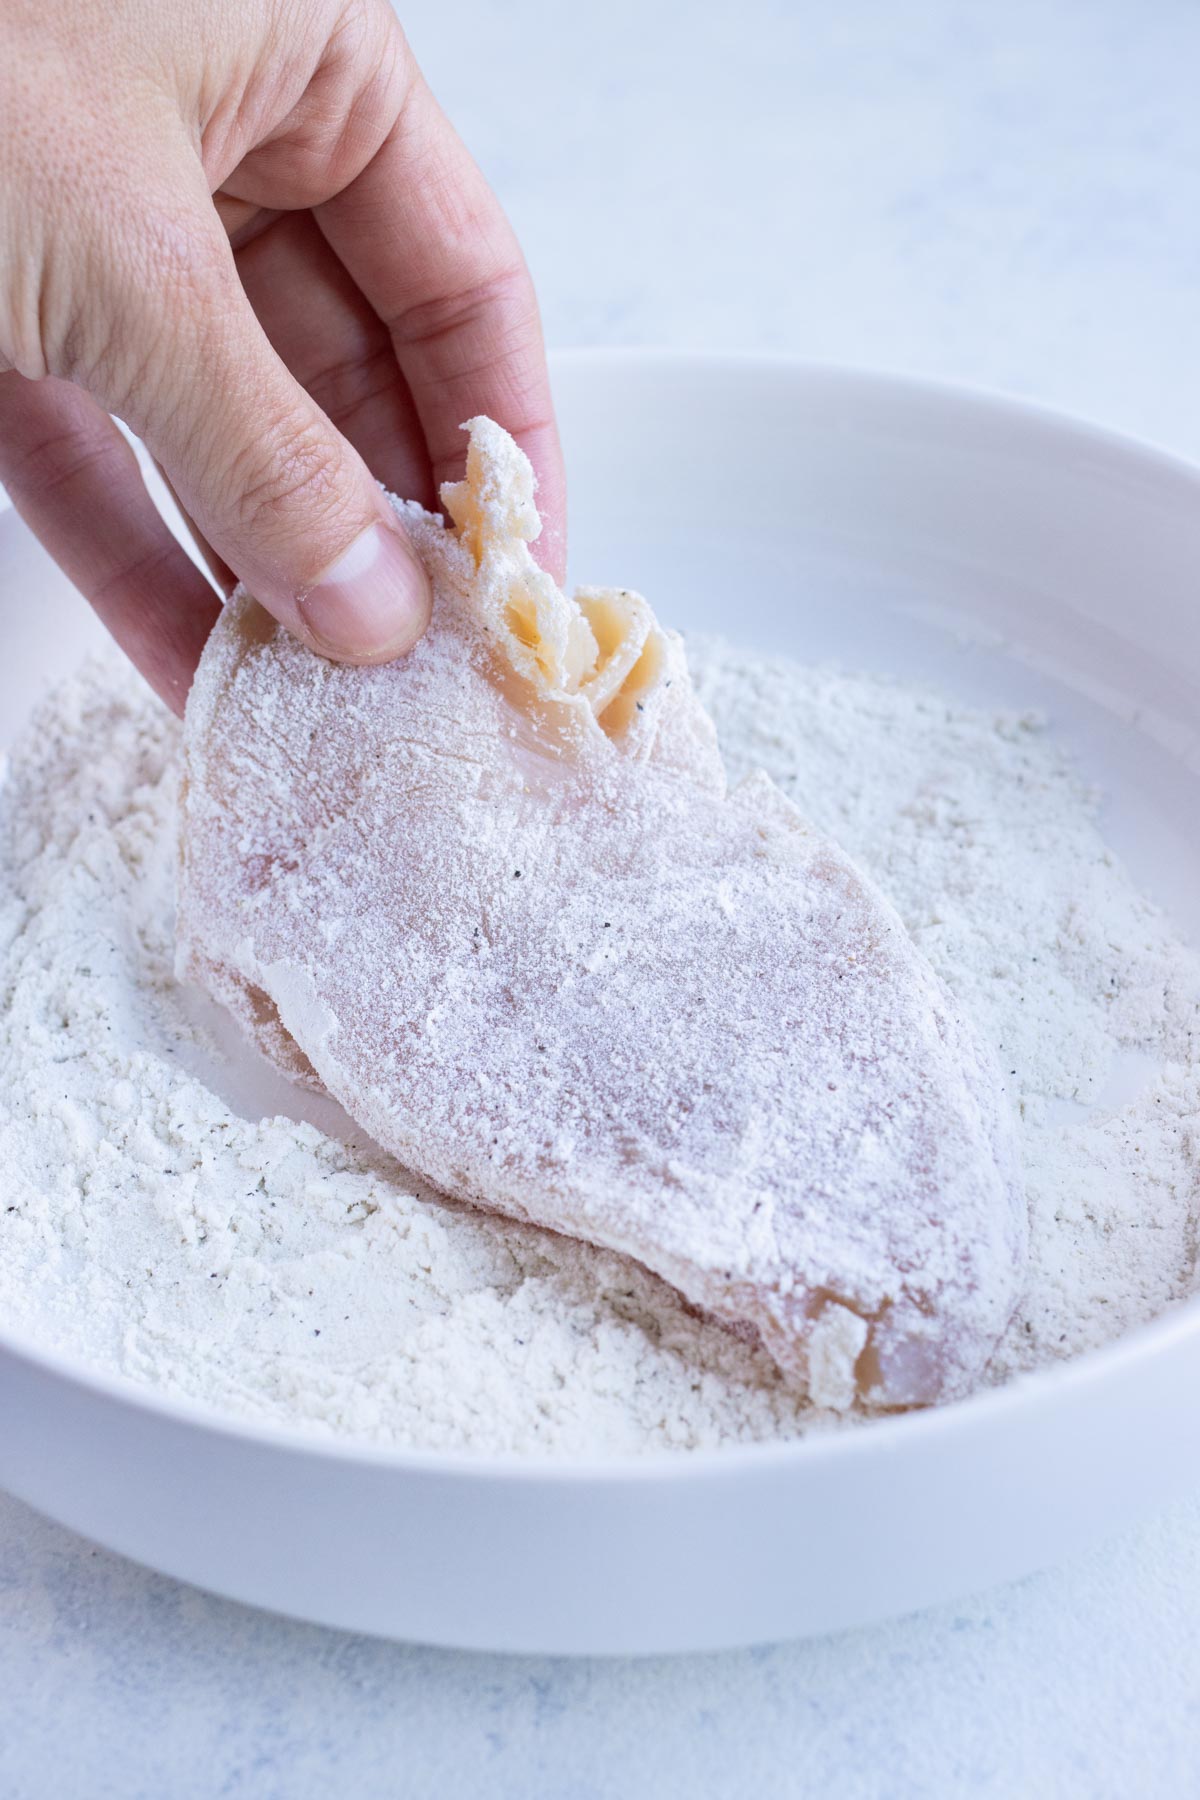 Chicken is covered in flour before cooking.